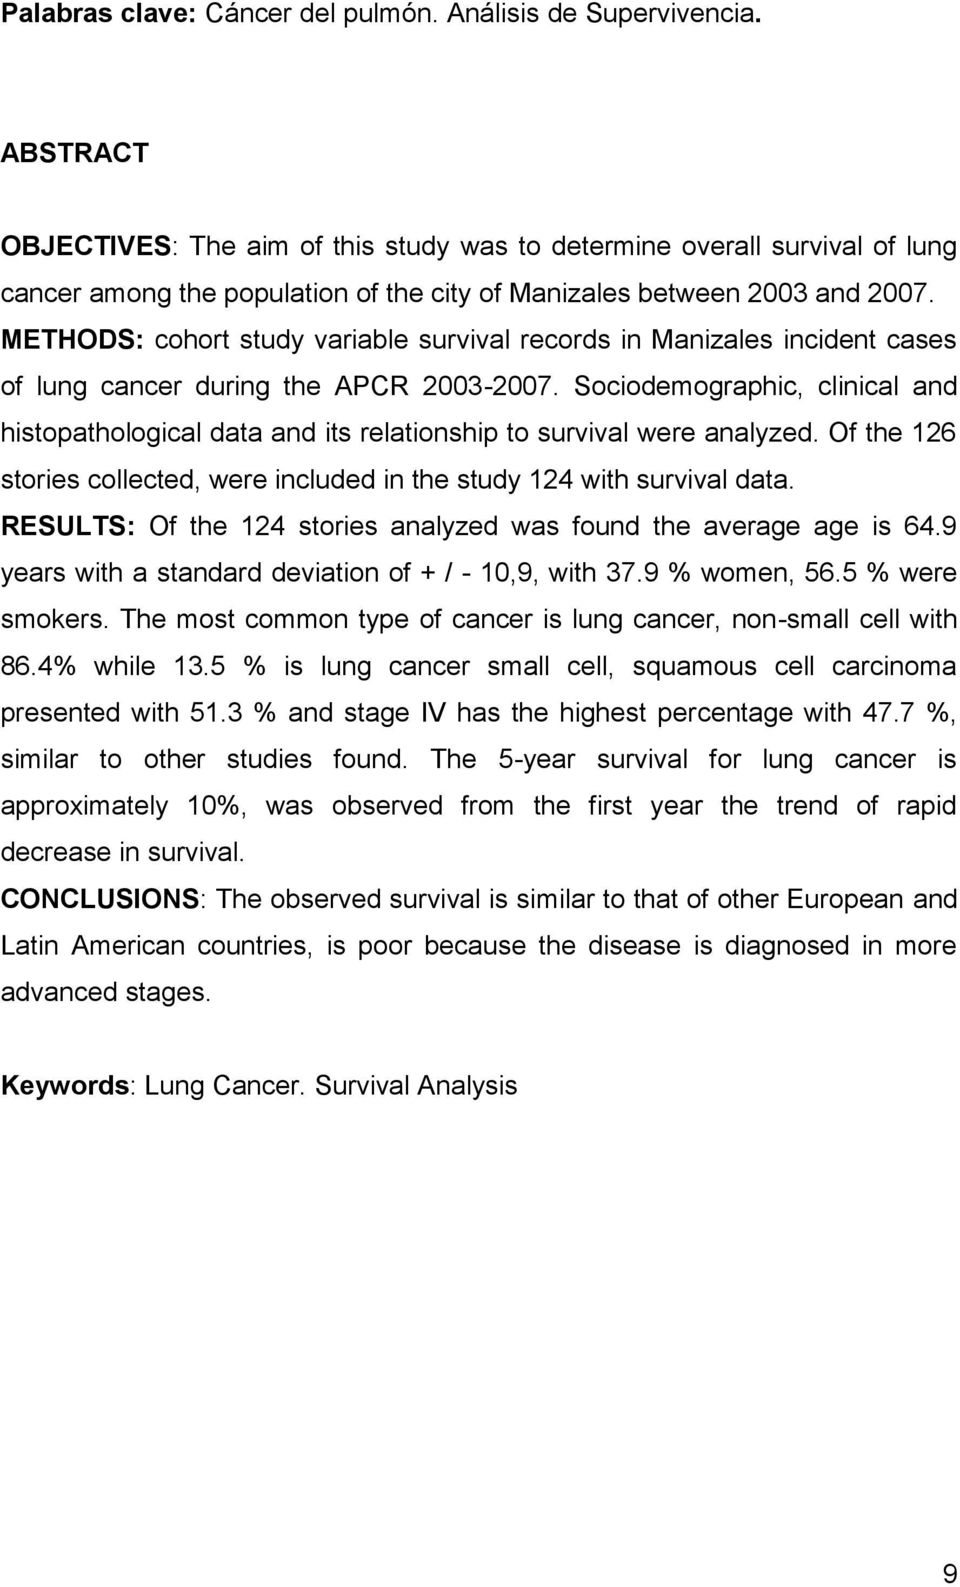 METHODS: cohort study variable survival records in Manizales incident cases of lung cancer during the APCR 2003-2007.